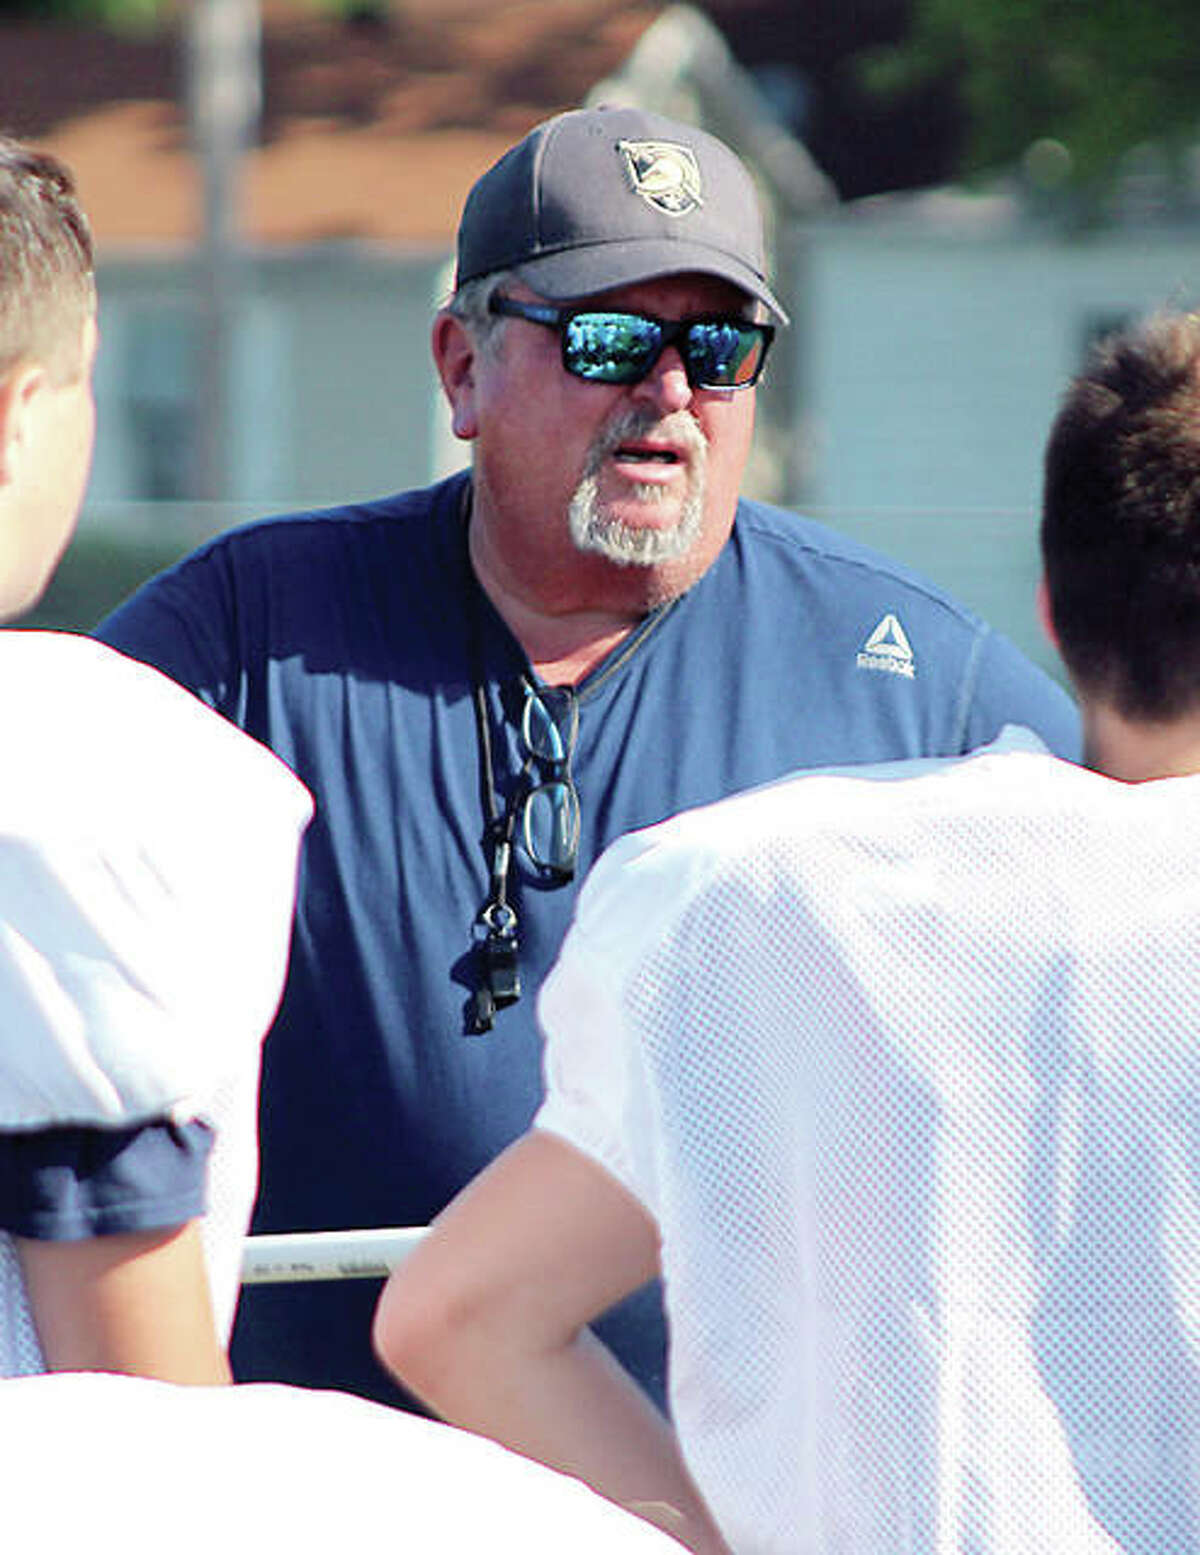 Jersey football coach Ric Johns speaks with his players during a practice session.